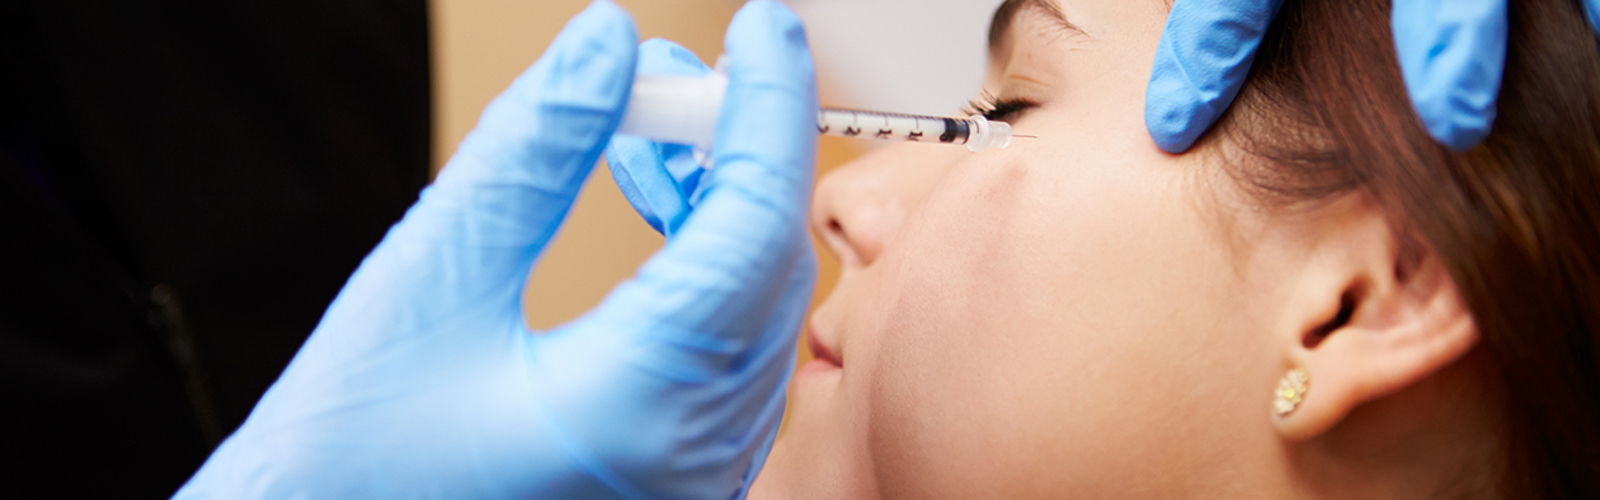 Botox: a popular beauty treatment offered by high street salons